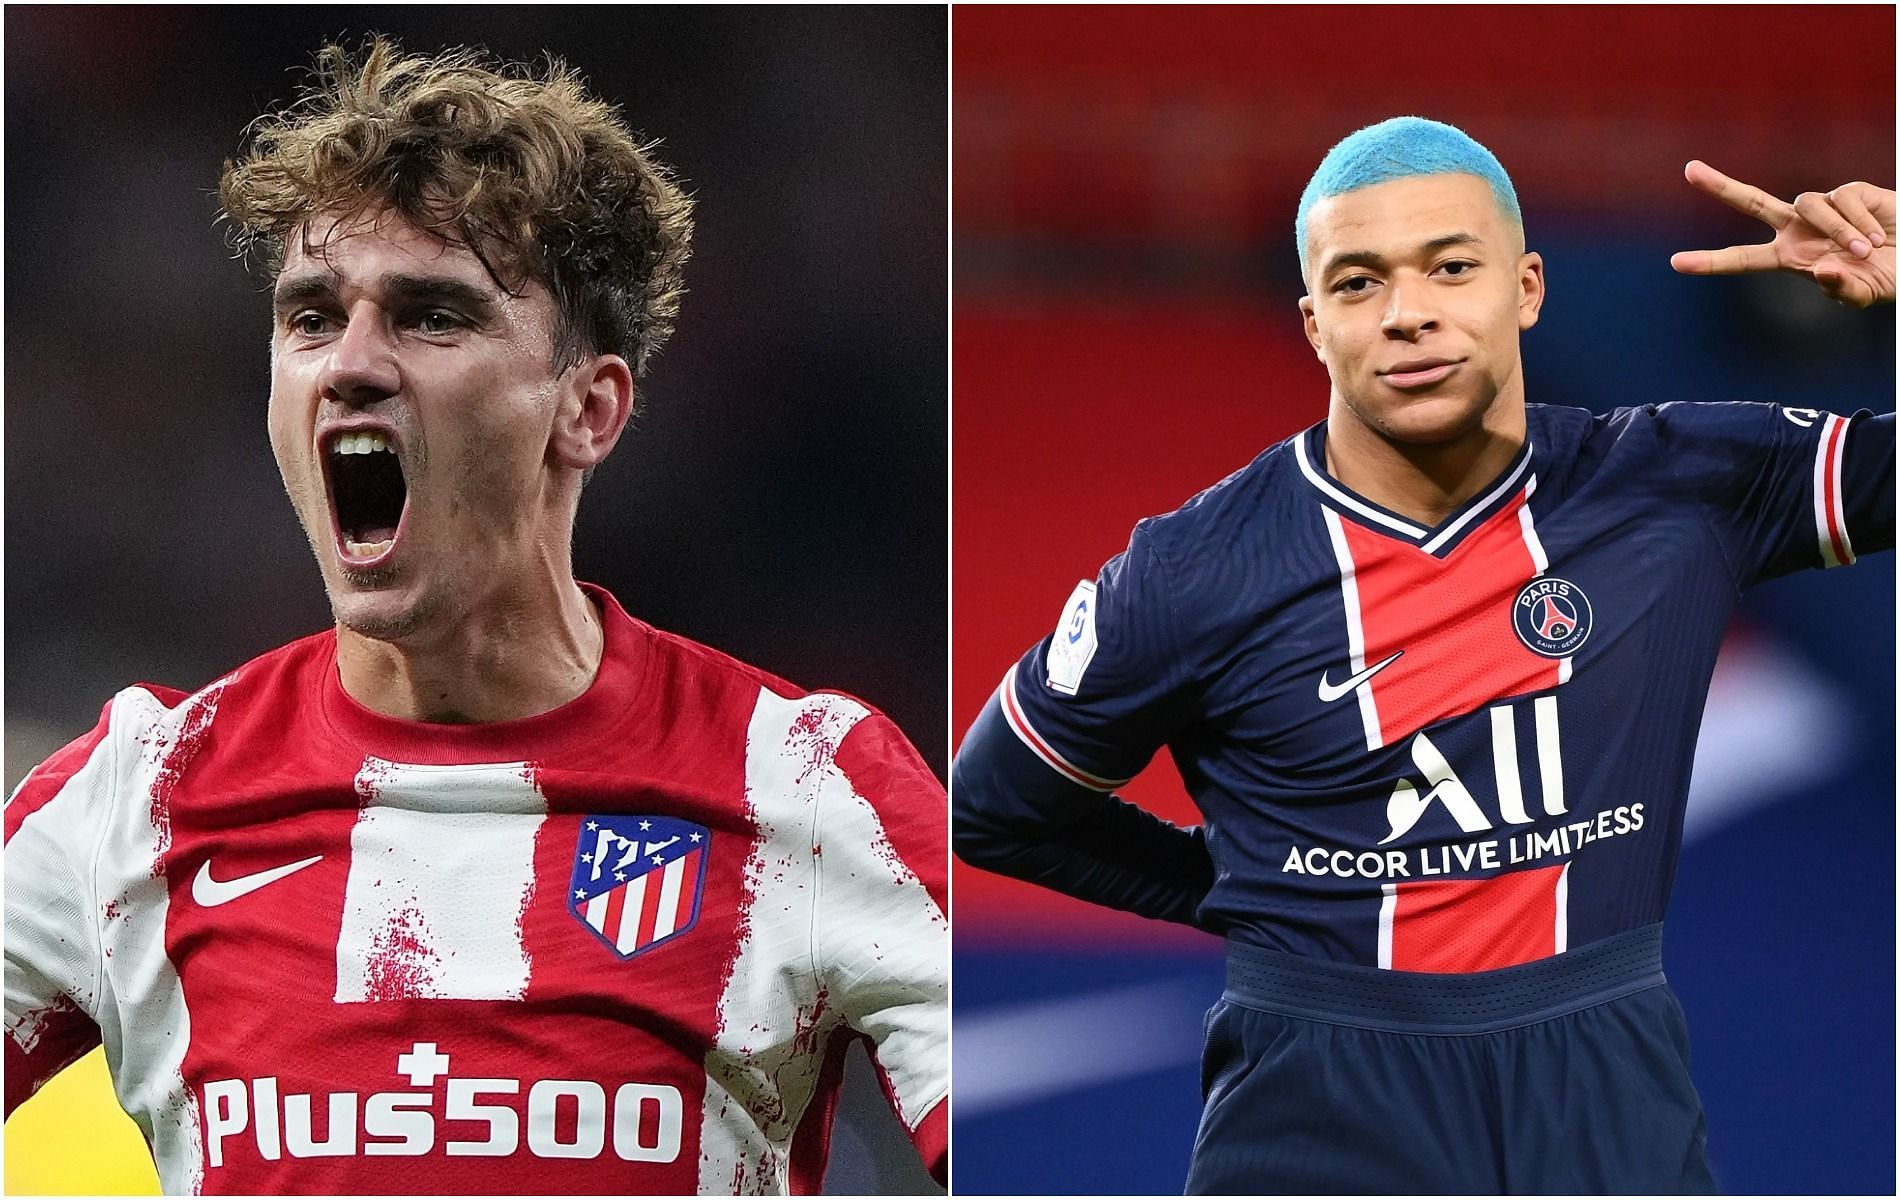 Griezmann and Mbappe are great alternatives to Cristiano Ronaldo in FIFA 22 (Image via Sportskeeda)